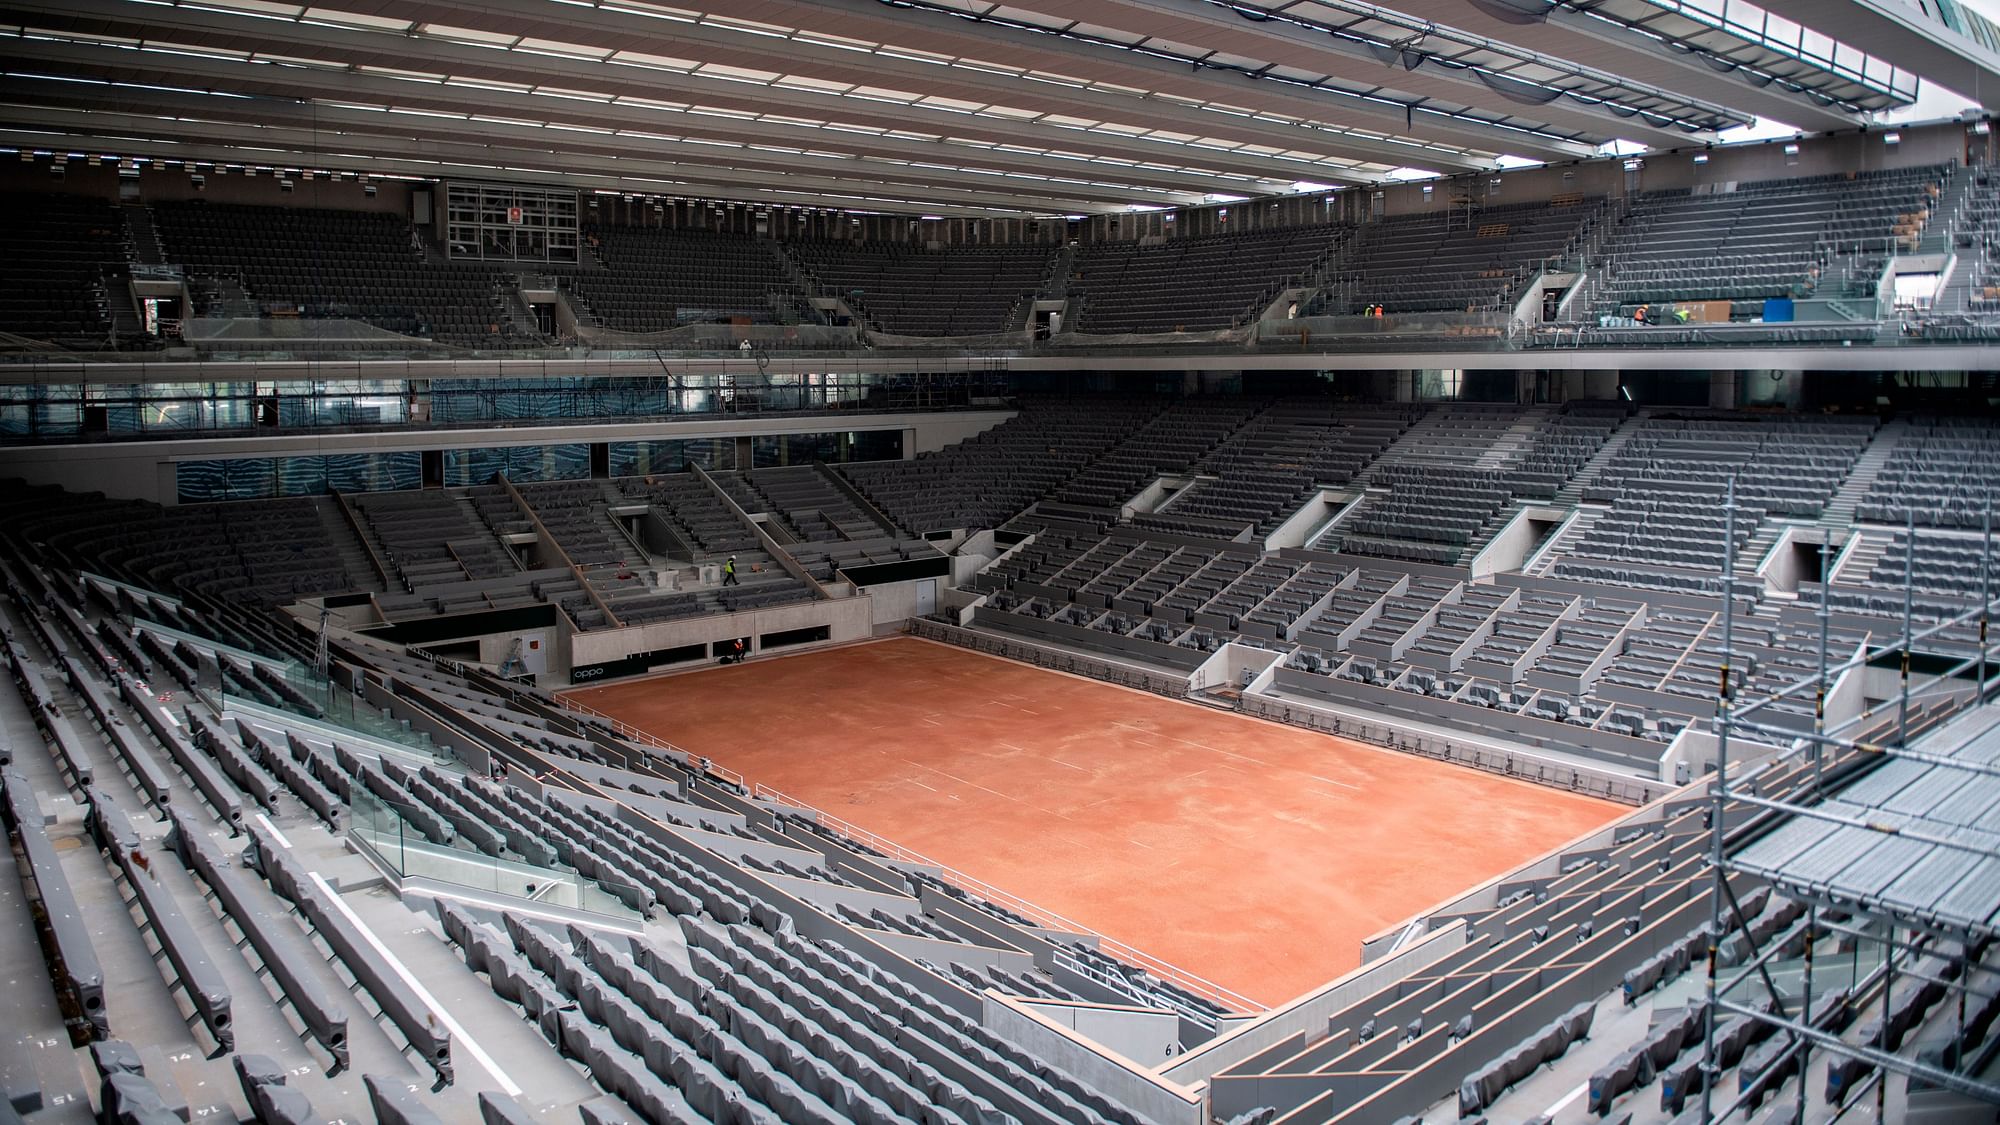 The 2021 French Open has been postponed by a week